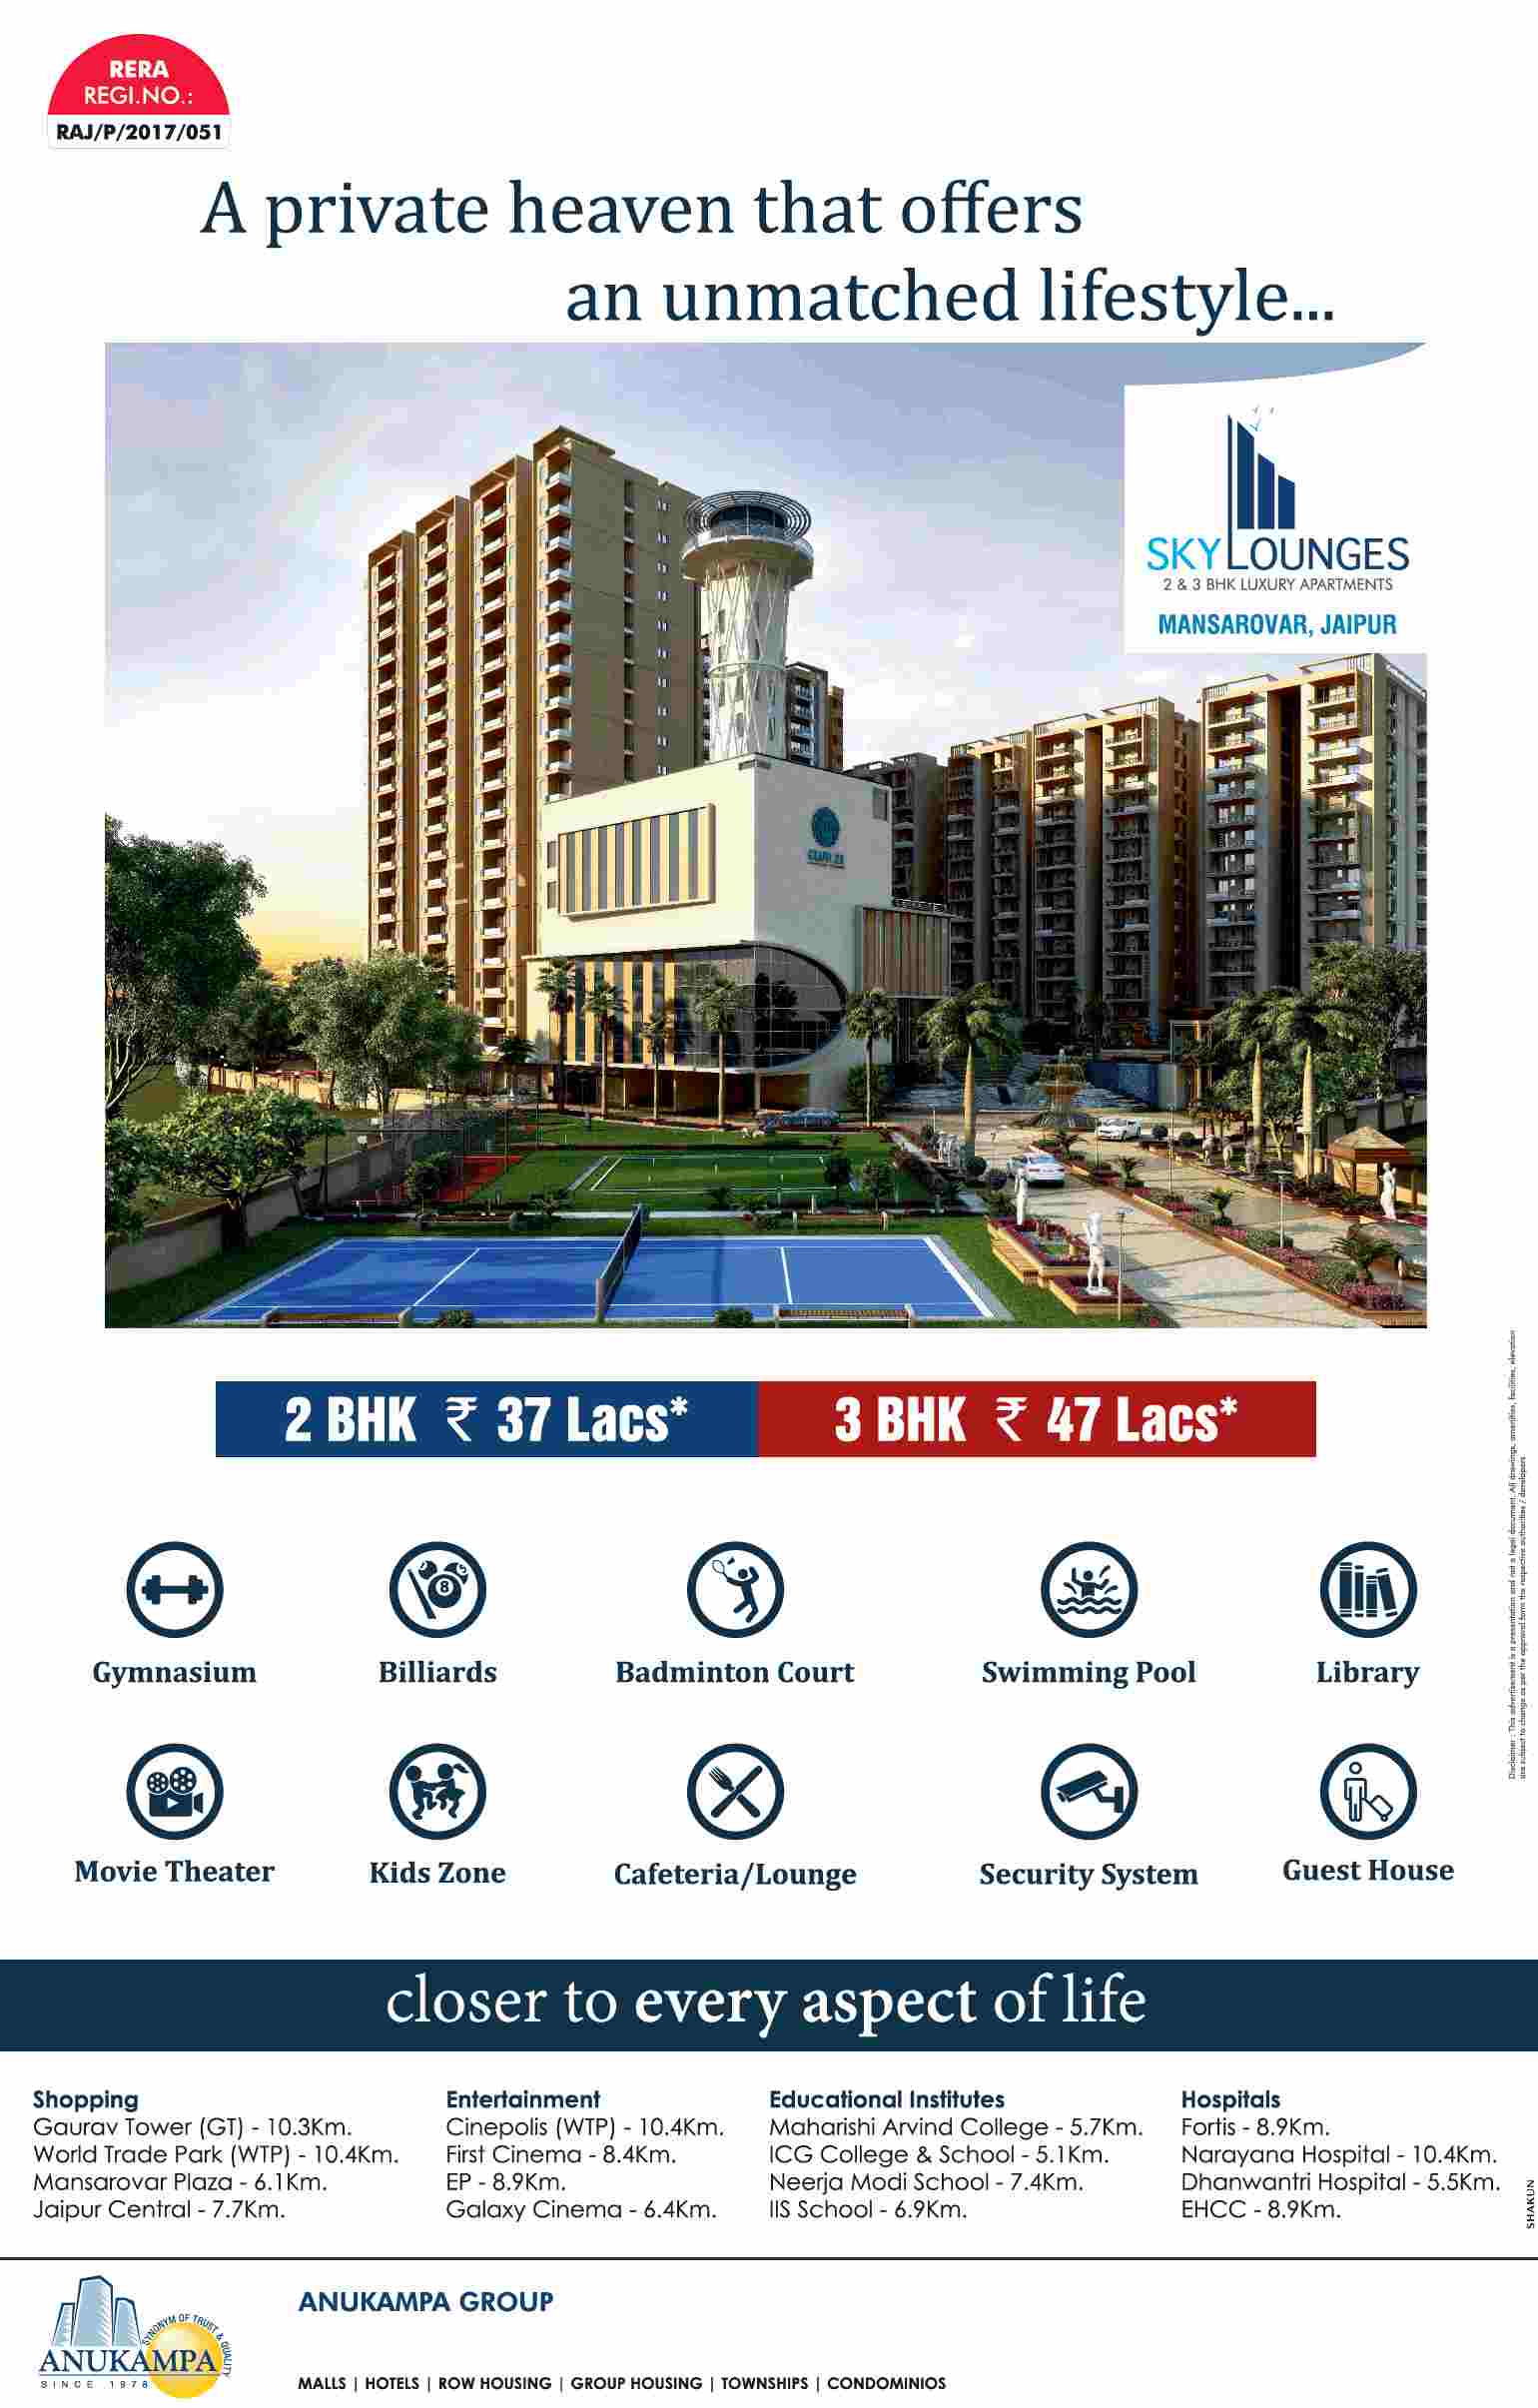 Live in home that offers an unmatched lifestyle at Anukampa Sky Lounges in Jaipur